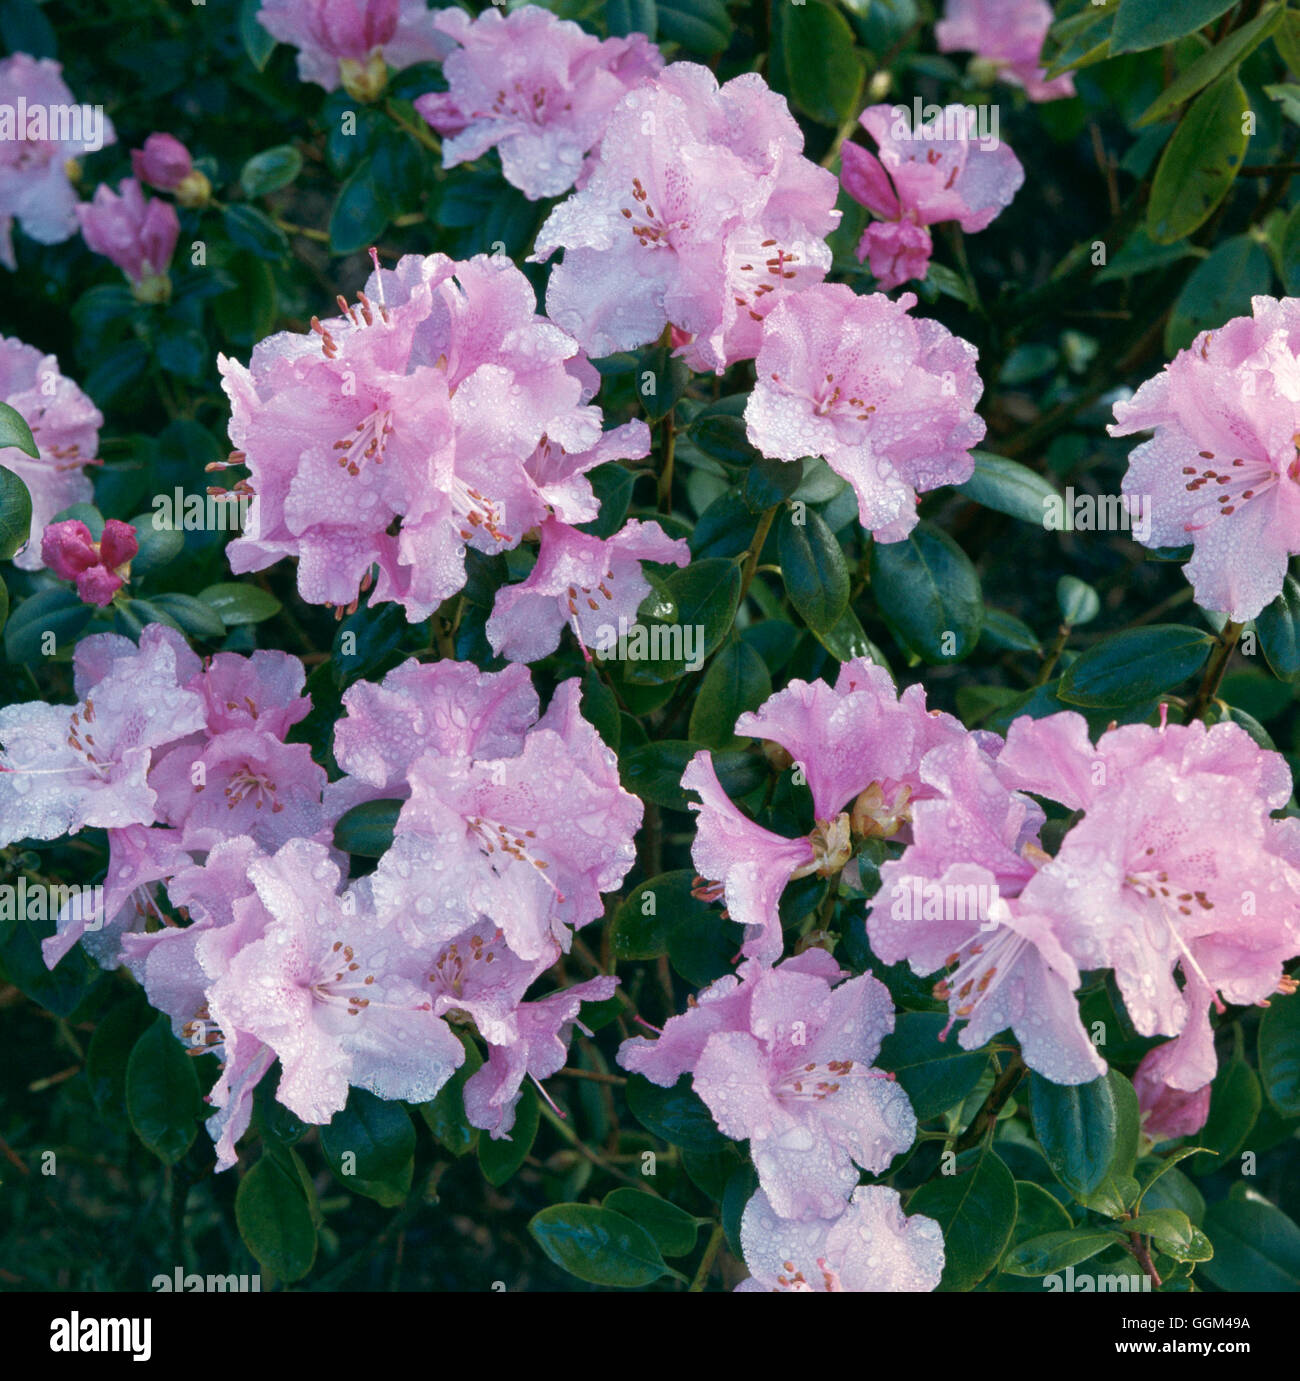 Rhododendron - Preacox group   RHO021729 Stock Photo